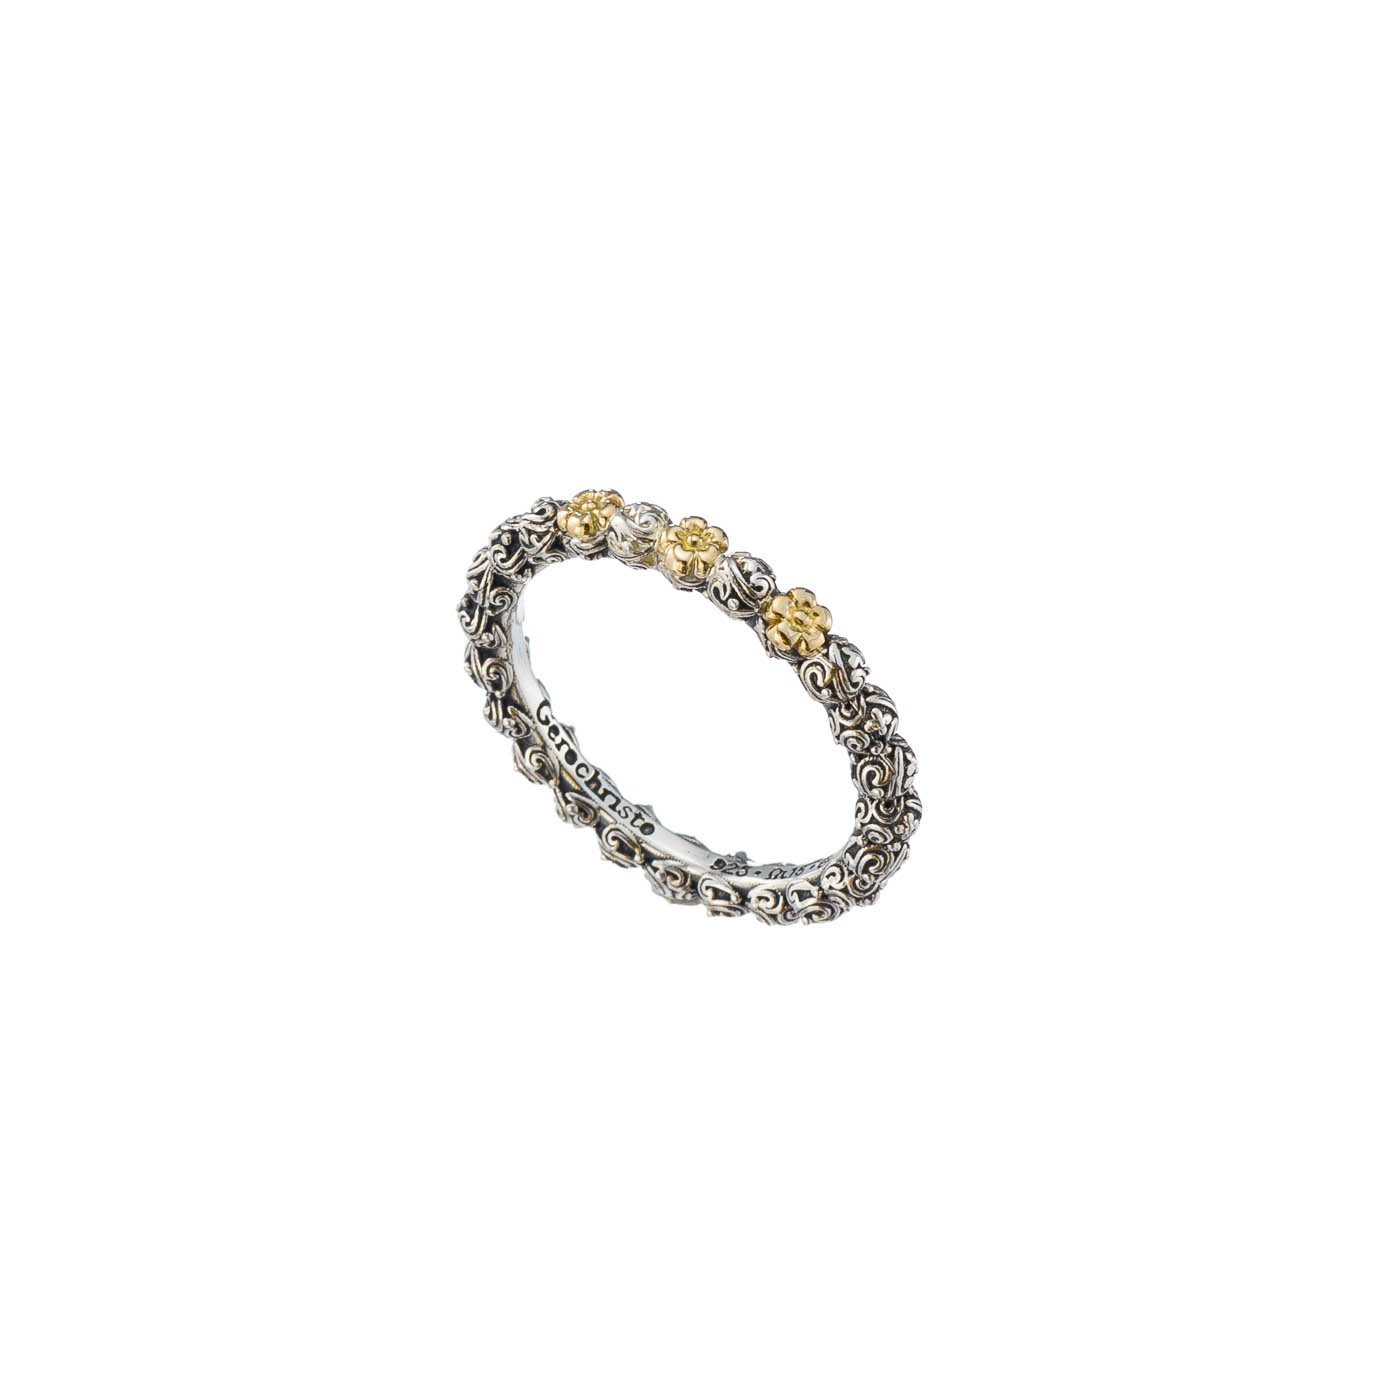 Eve band ring in Sterling silver and details in 18K Gold